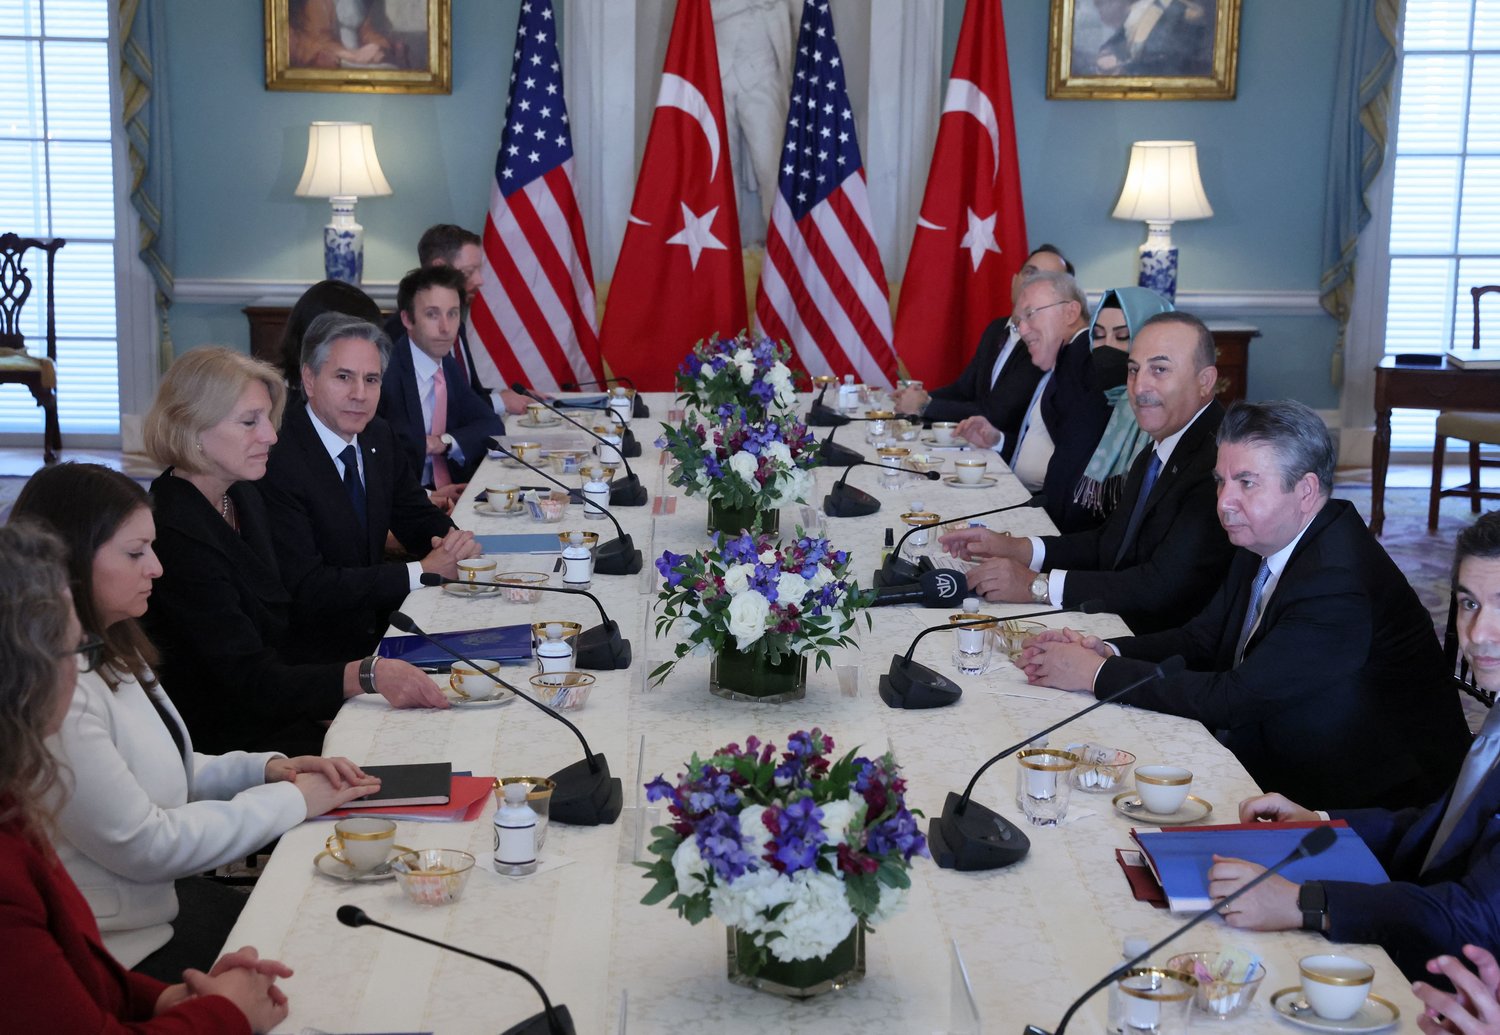 U.S. Secretary of State Antony Blinken meets with Turkish Foreign Minister Mevlut Cavusoglu at the State Department in Washington, DC, on January 18, 2023. (LEAH MILLIS/POOL/AFP via Getty Images/TNS)